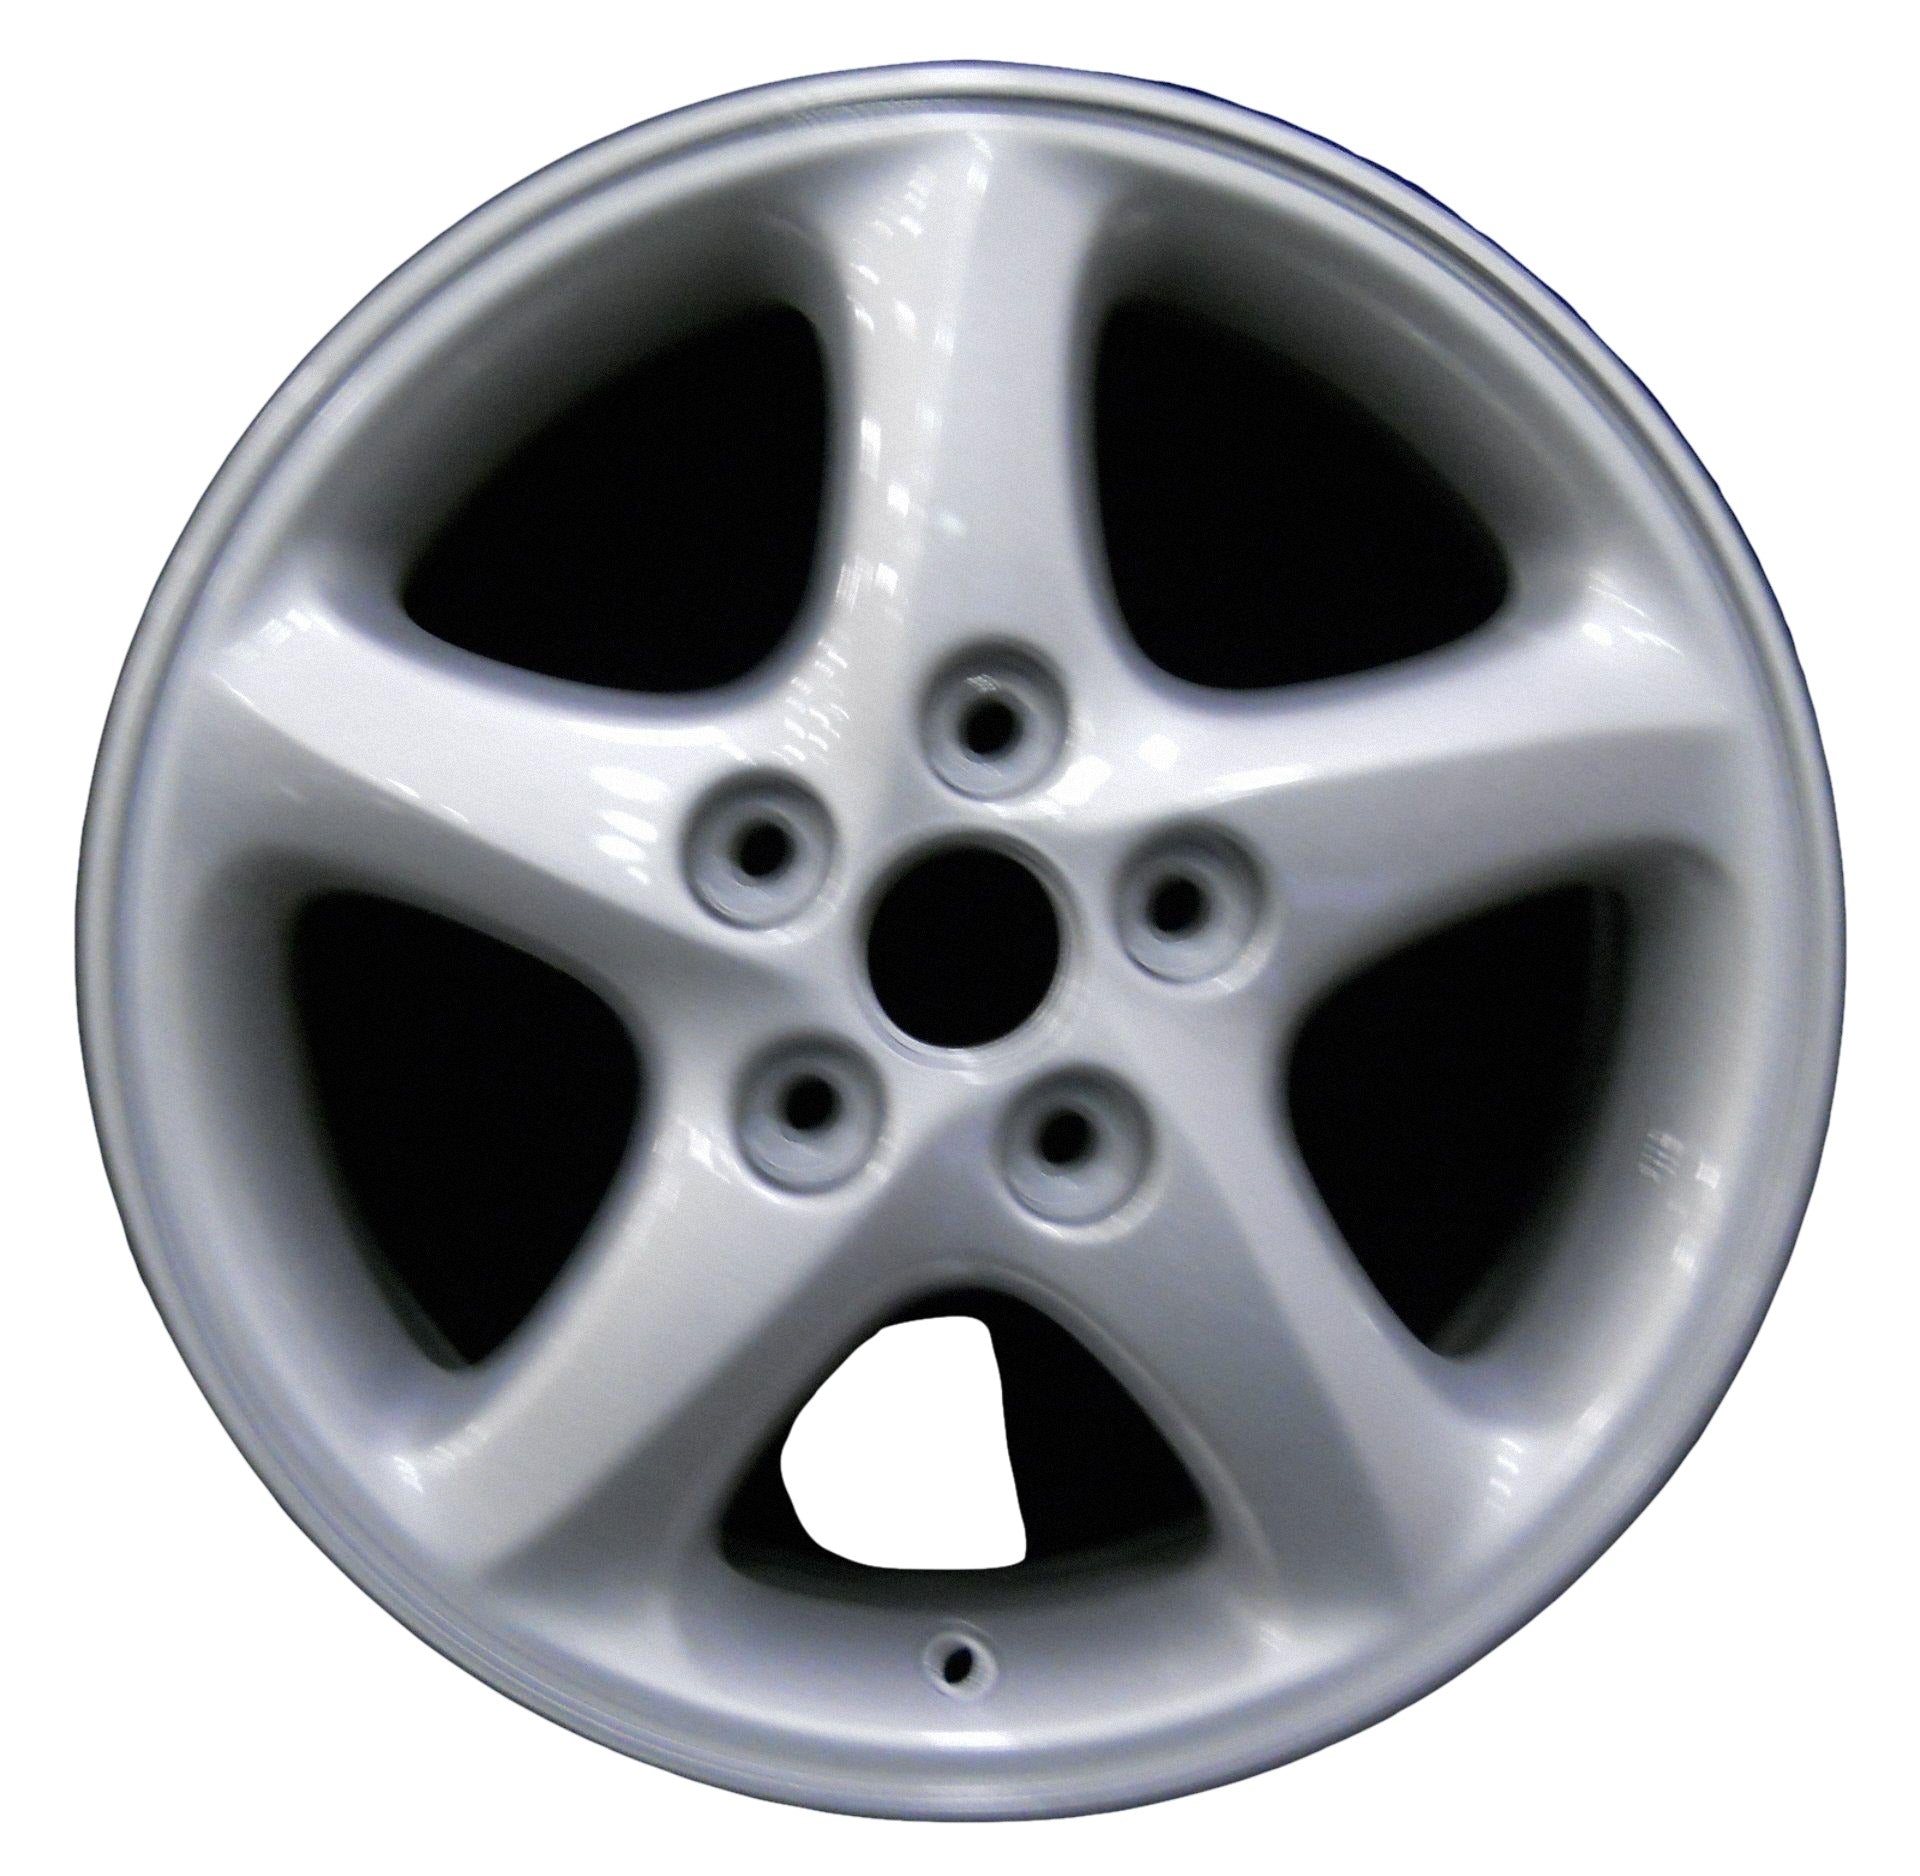 Mazda Protege  2001 Factory OEM Car Wheel Size 16x6.5 Alloy WAO.64840.PS13.FF